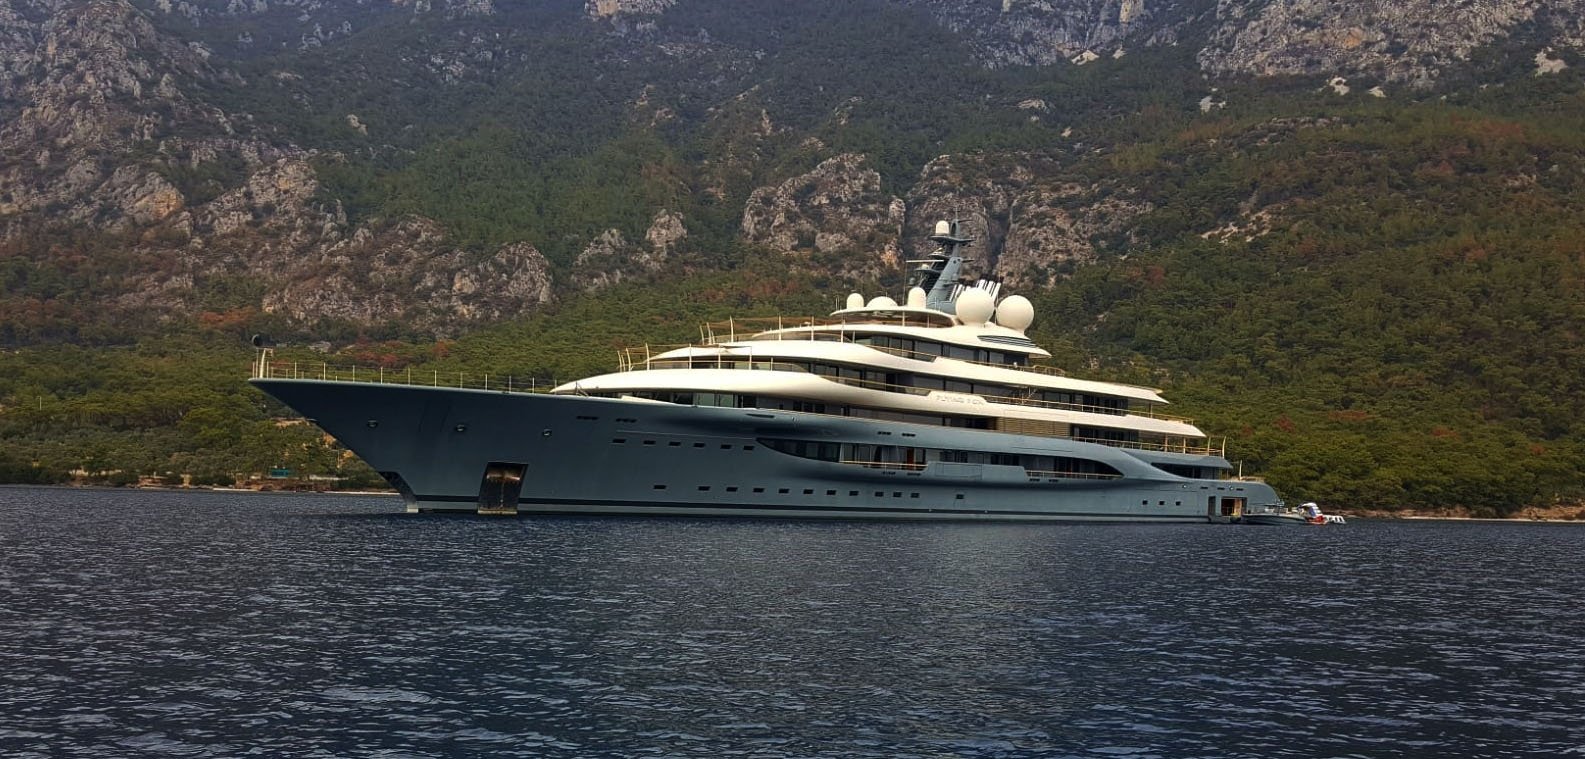 One of the largest luxury yachts in the world, "Flying Fox" can be seen anchored in a bay. (Photo by AA)